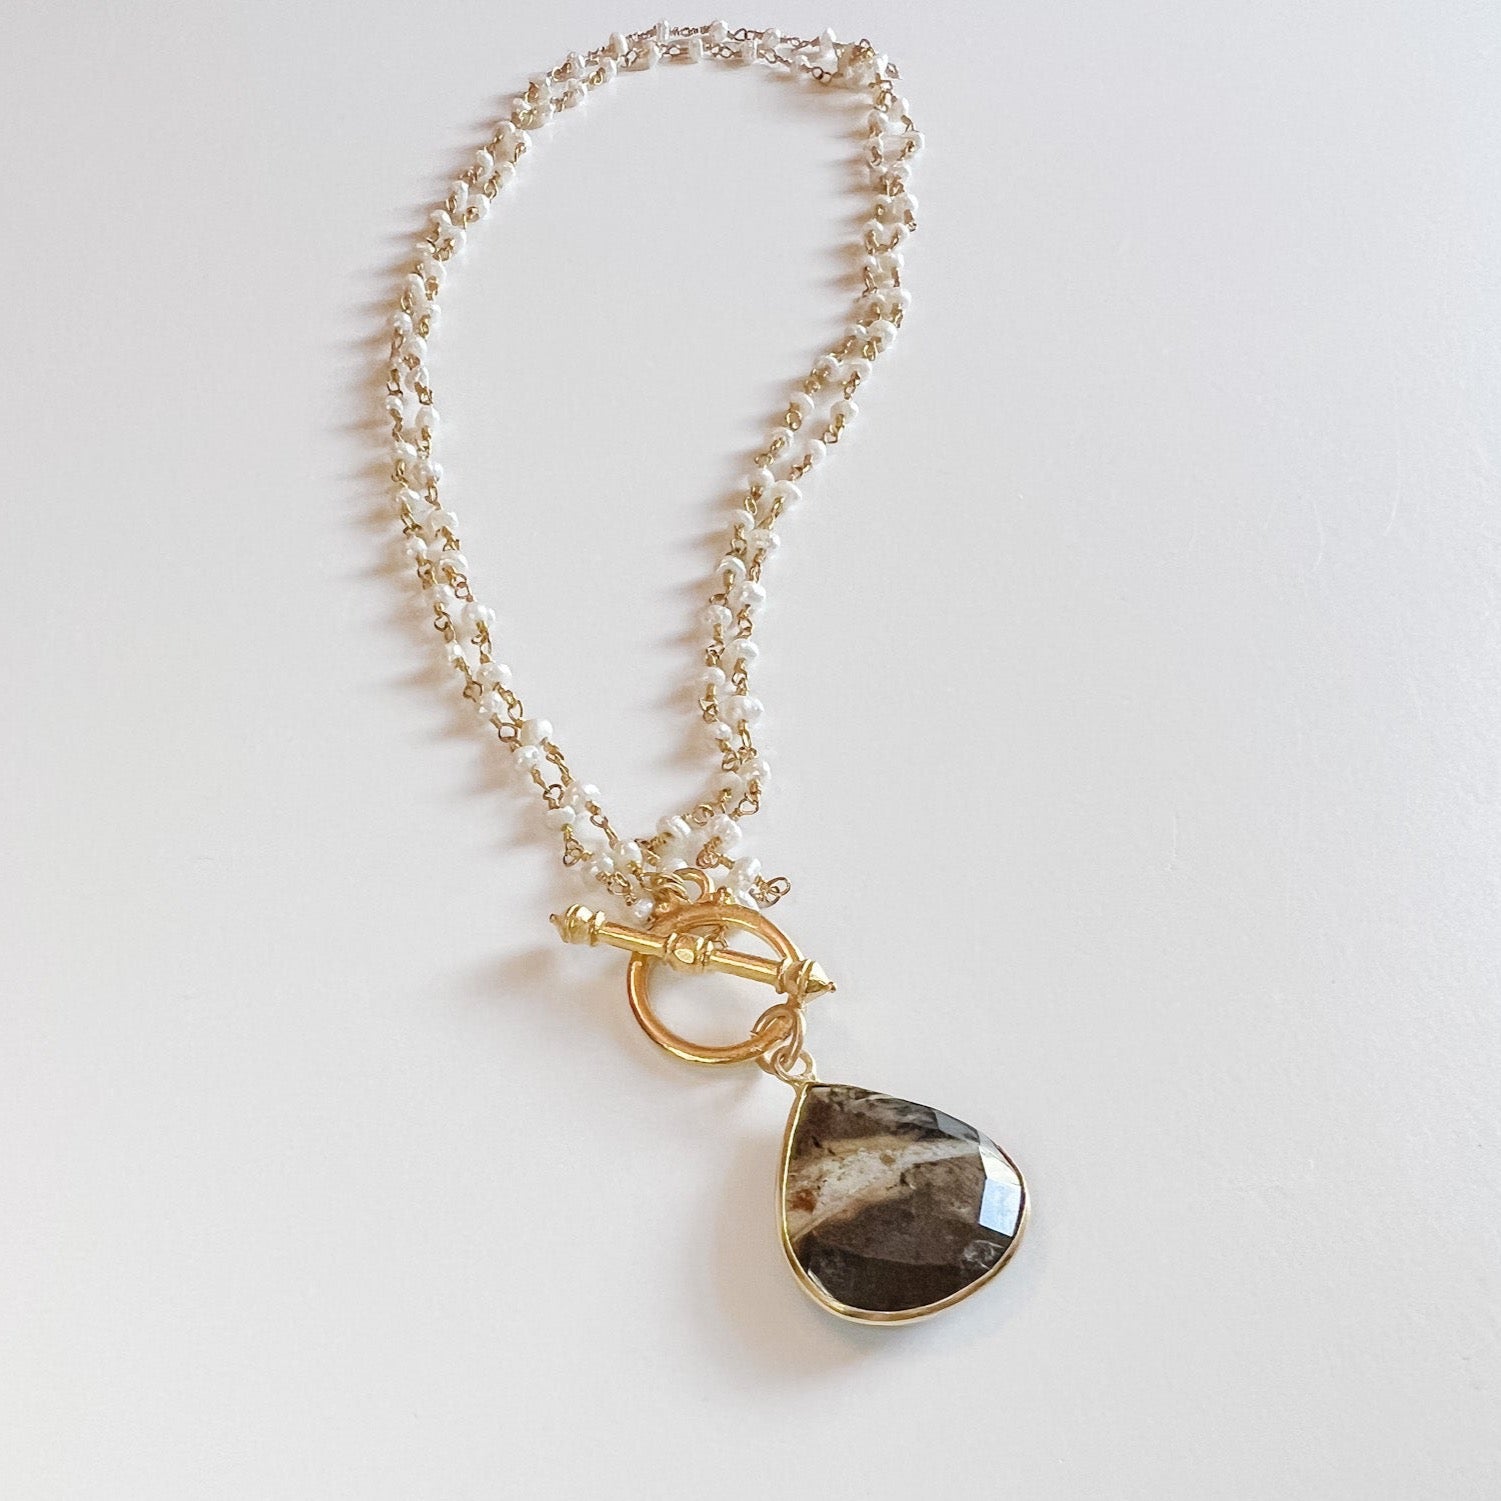 STONE CHARM NECKLACE WITH DAINTY GOLD CHAIN WITH PEARLS AND FRONT TOGGLE CLASP